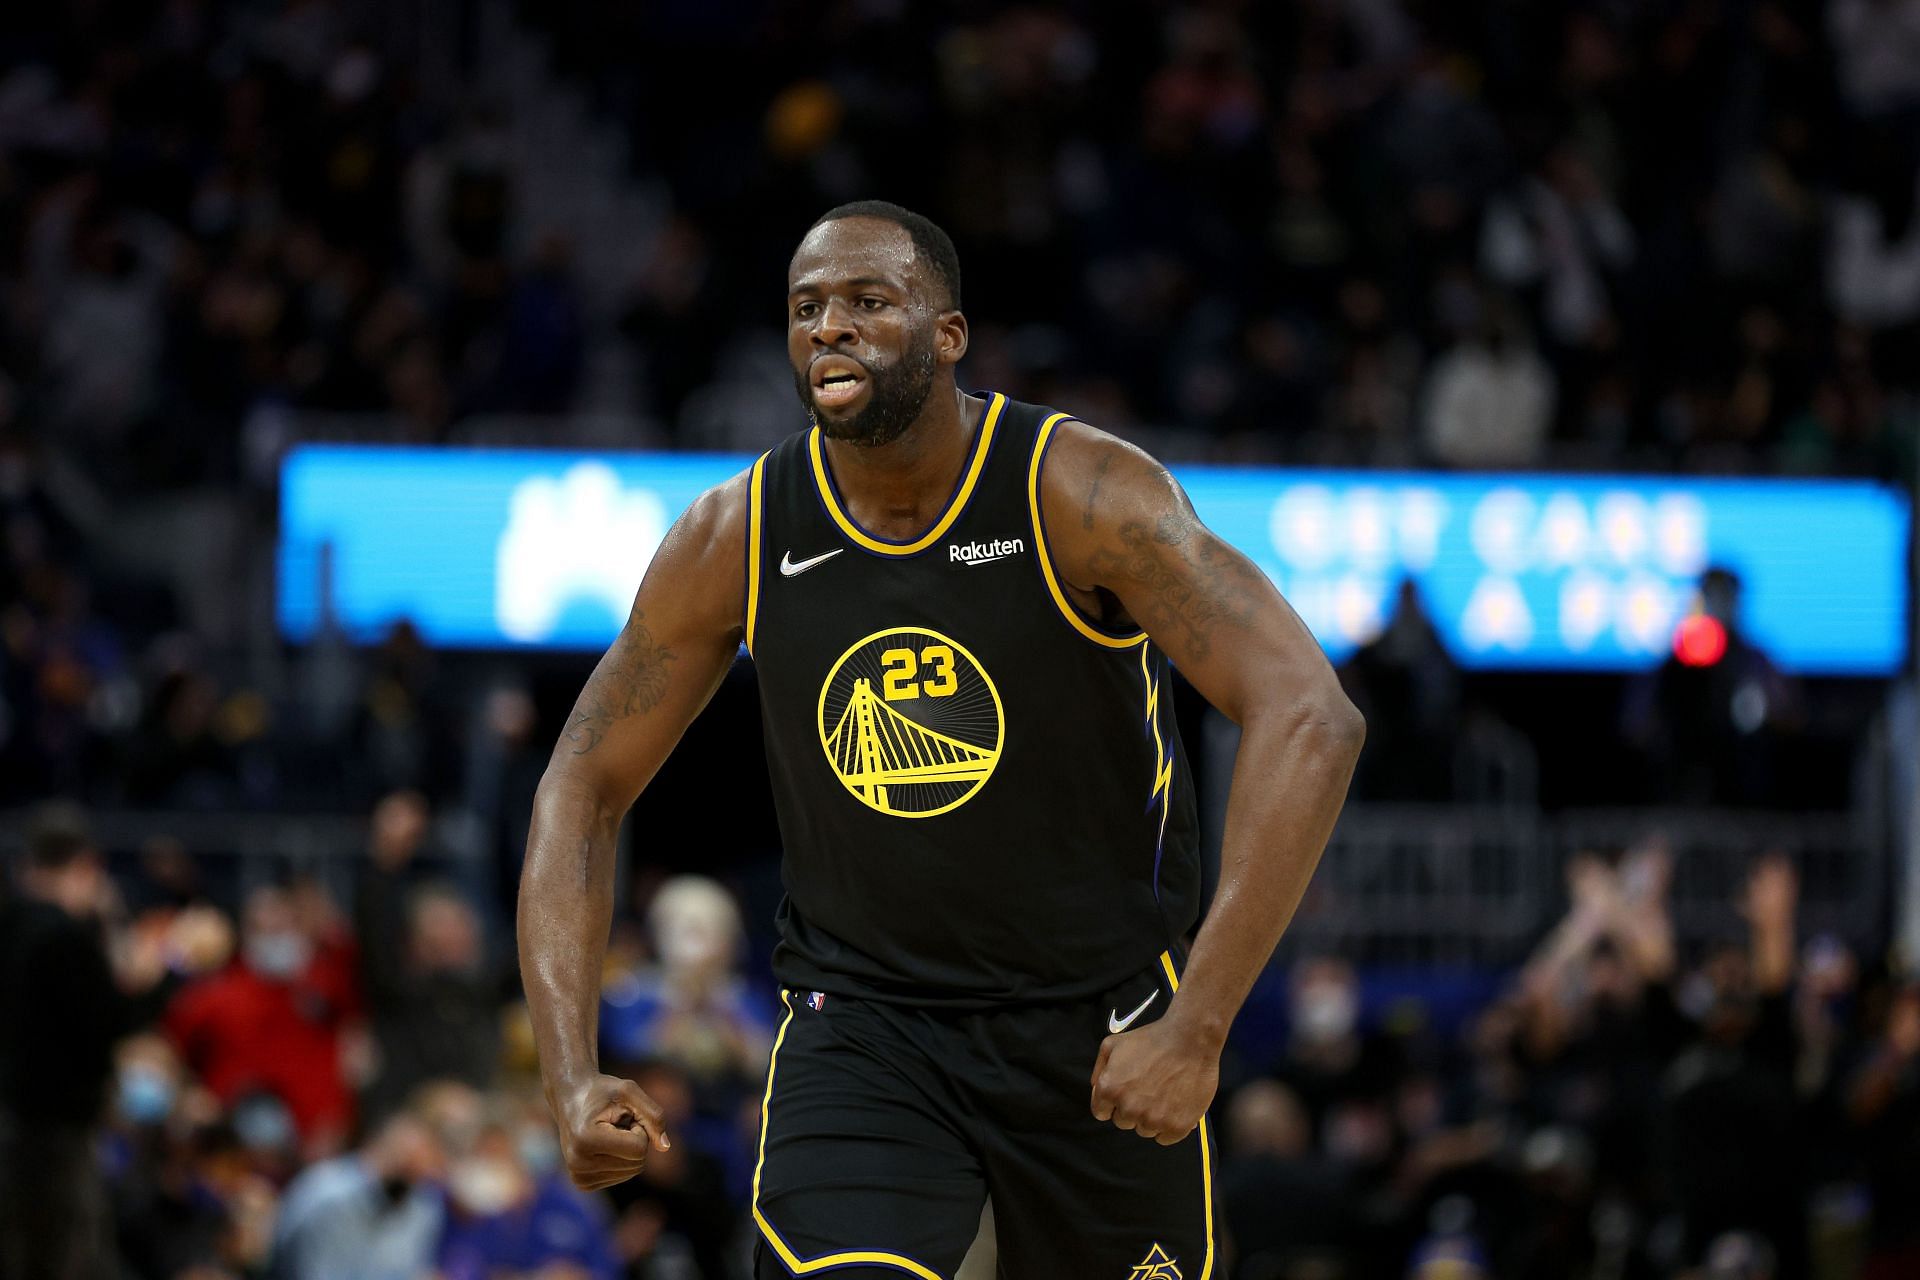 Draymond Green continues to be out with a back injury